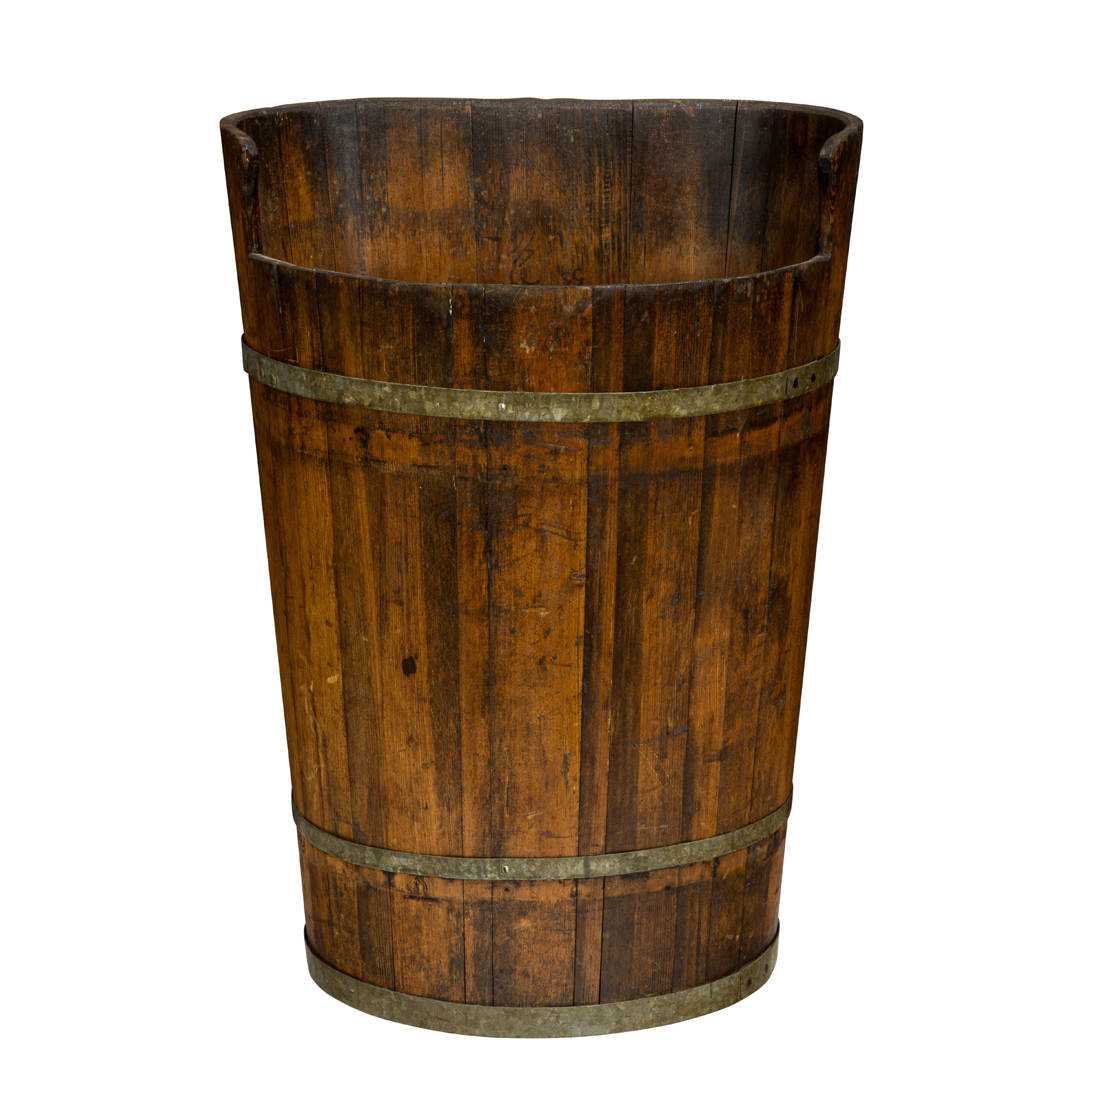 A FRENCH GRAPE HARVEST BARREL OR